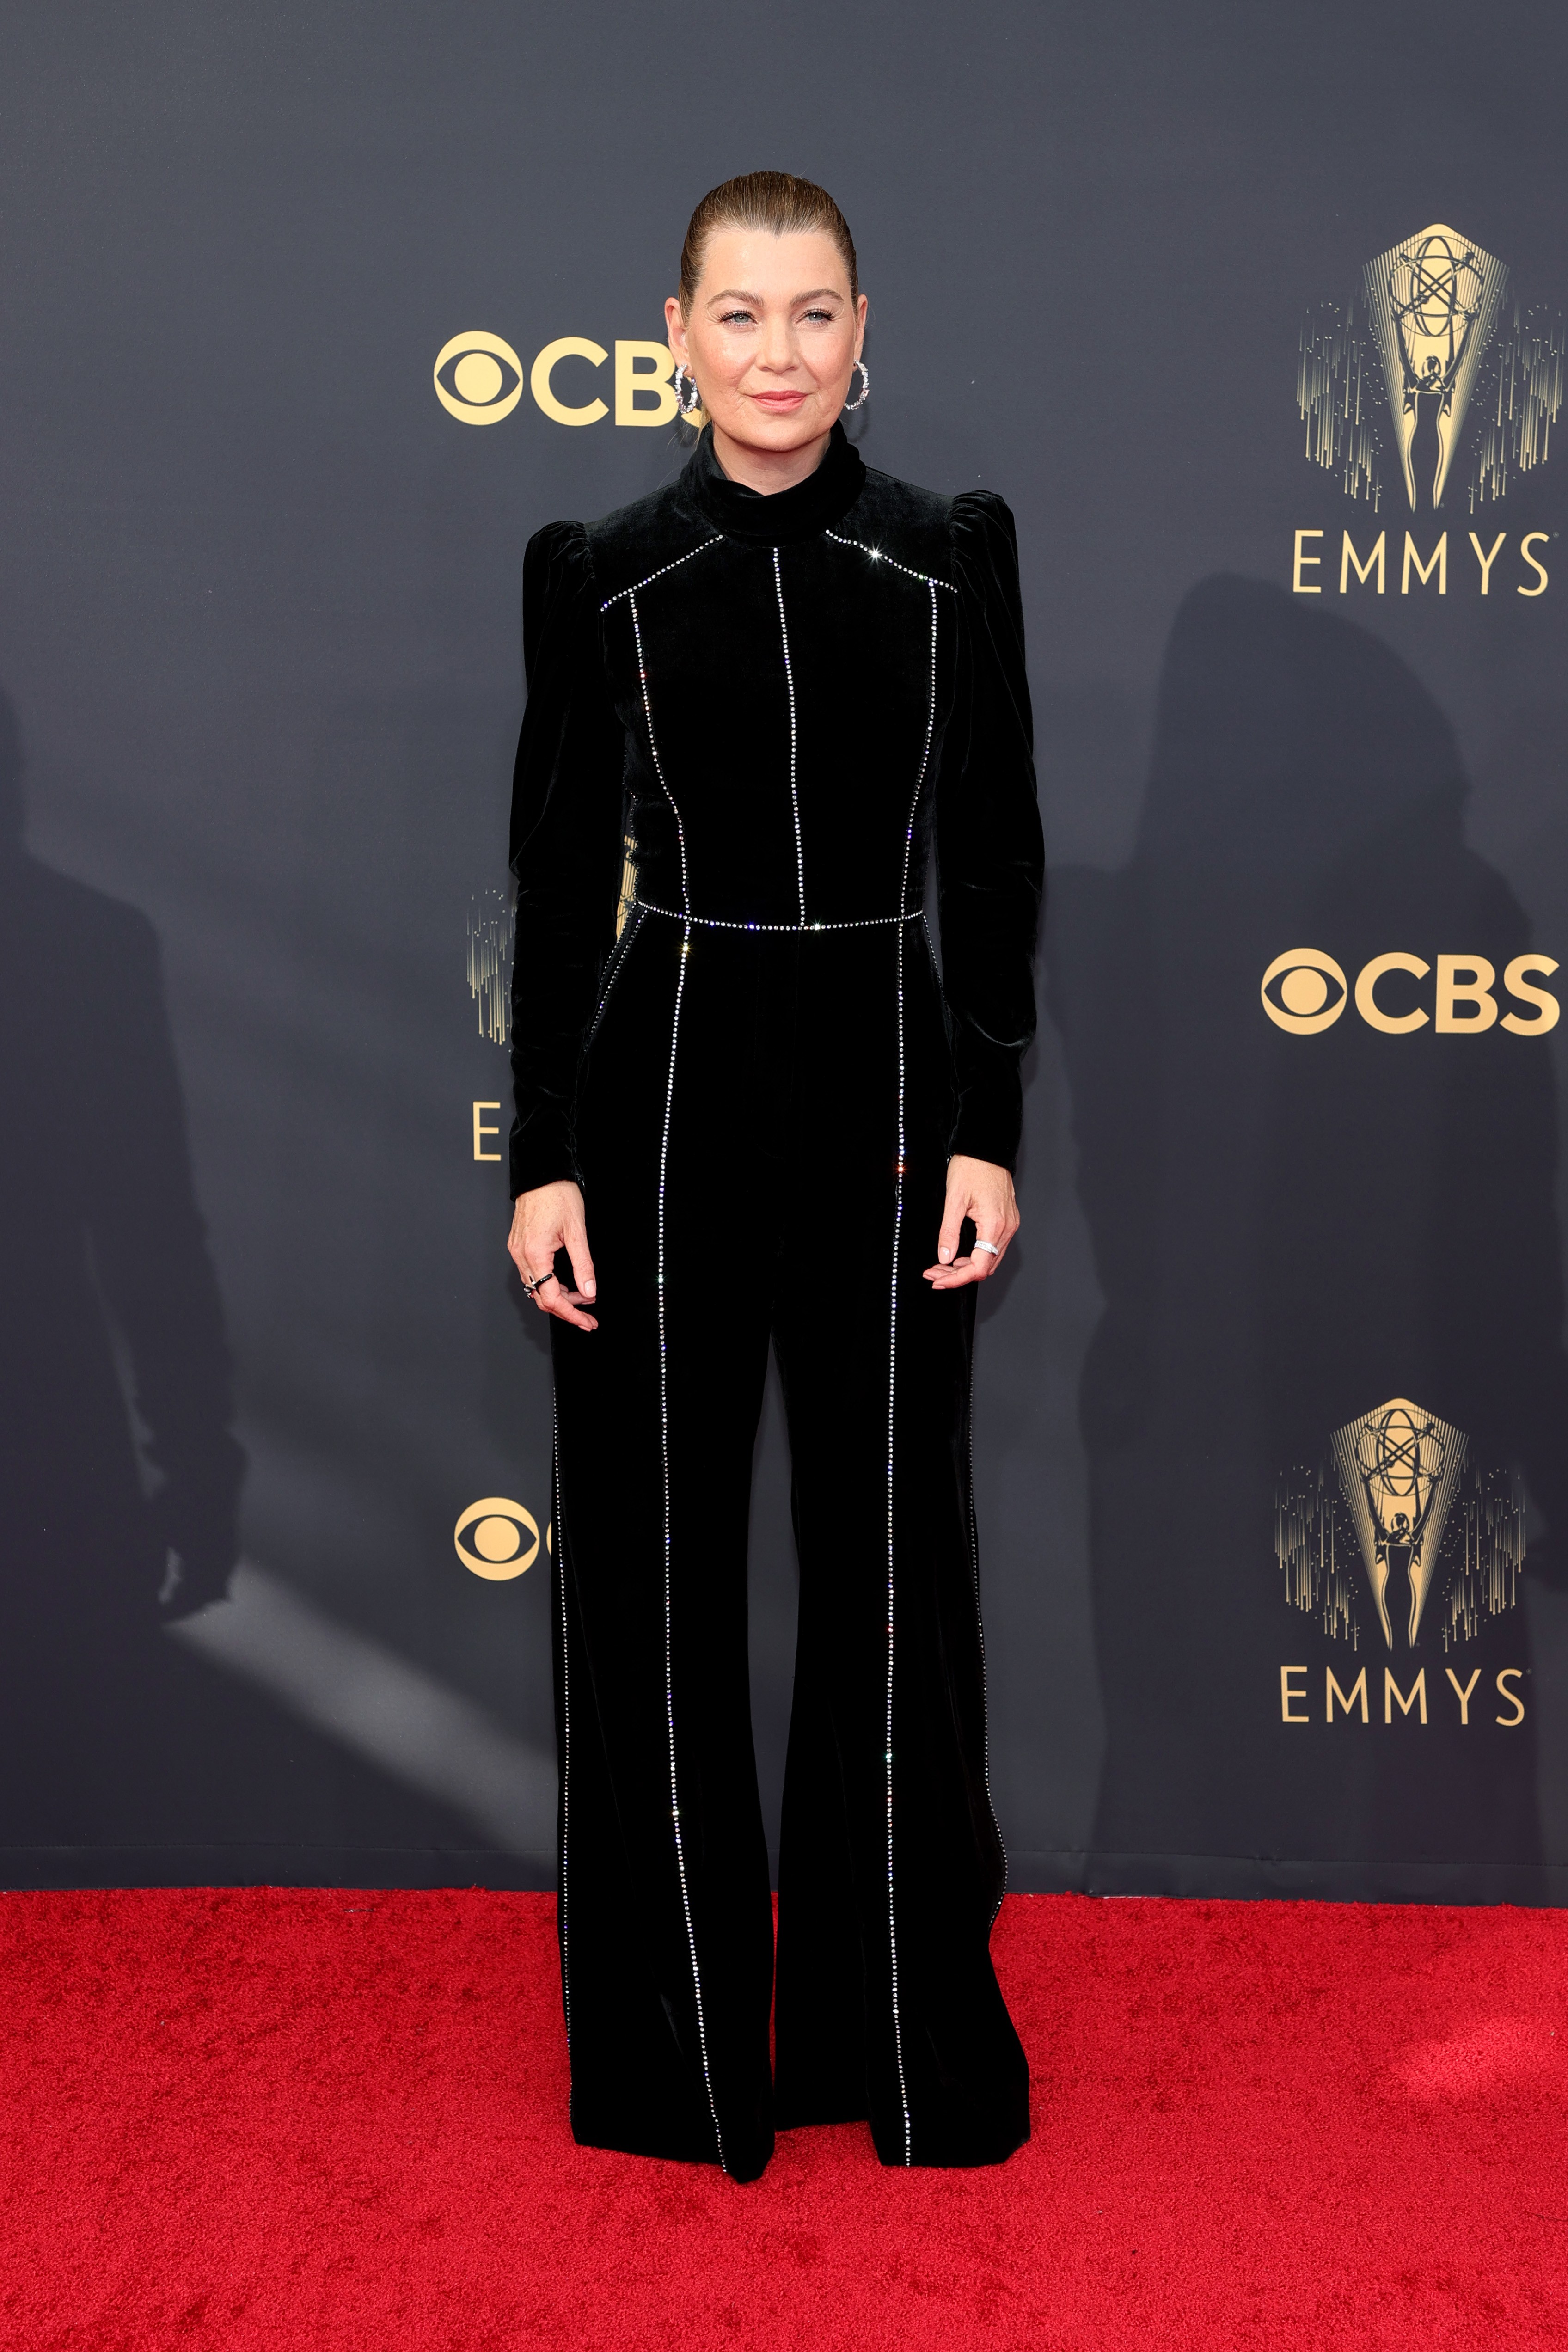 LOS ANGELES, CALIFORNIA - SEPTEMBER 19: Ellen Pompeo attends the 73rd Primetime Emmy Awards at L.A. LIVE on September 19, 2021 in Los Angeles, California. (Photo by Rich Fury/Getty Images) (Foto: Getty Images)